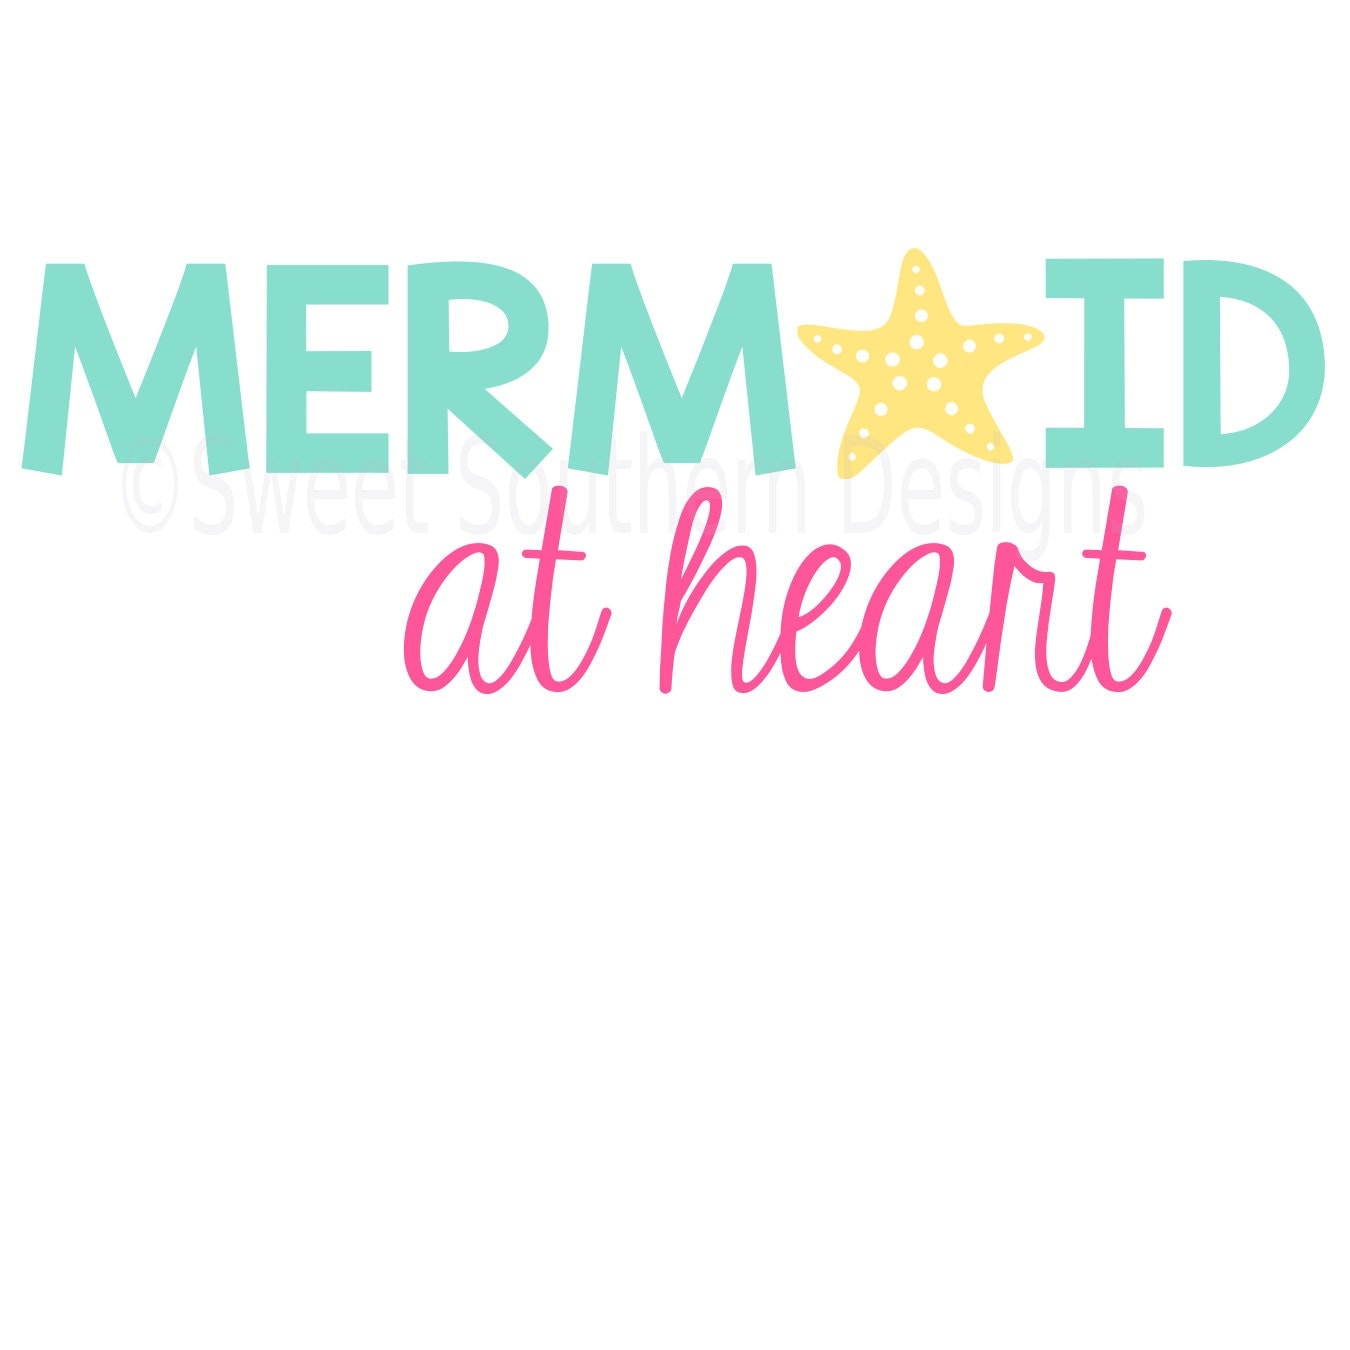 Mermaid at heart SVG instant download design for cricut or